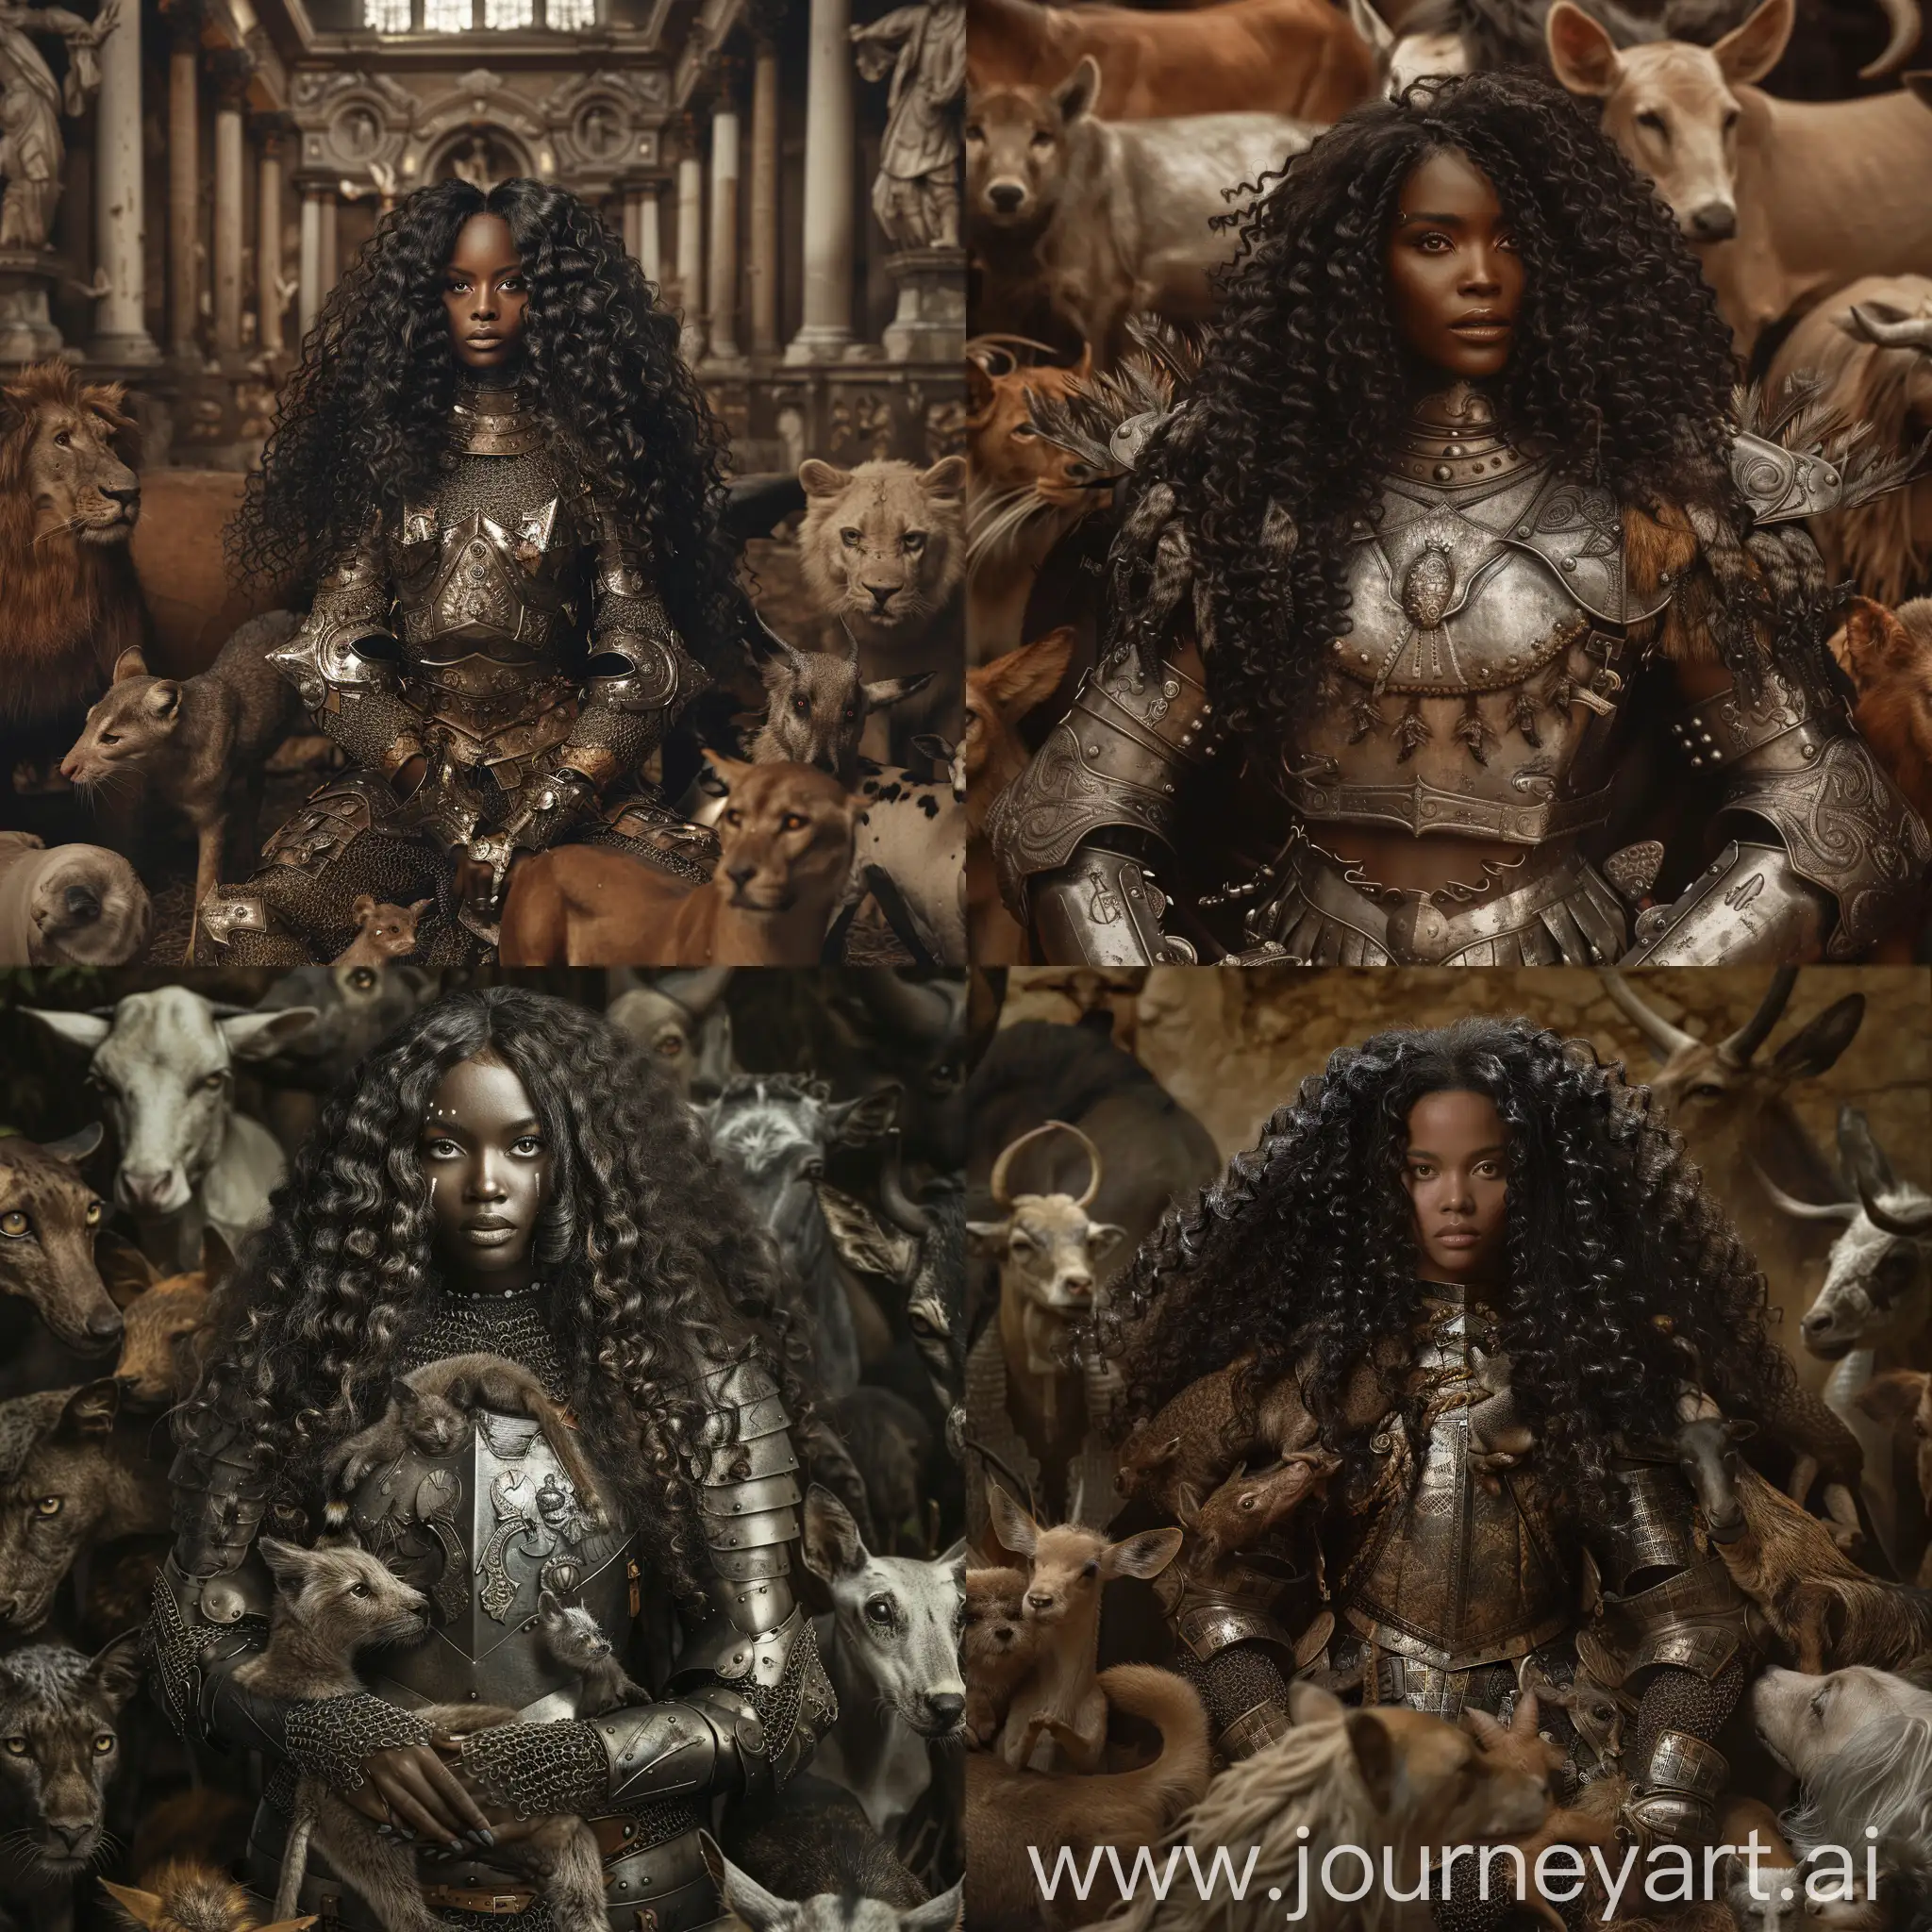 Black-Woman-in-Elaborate-Armor-Surrounded-by-Animals